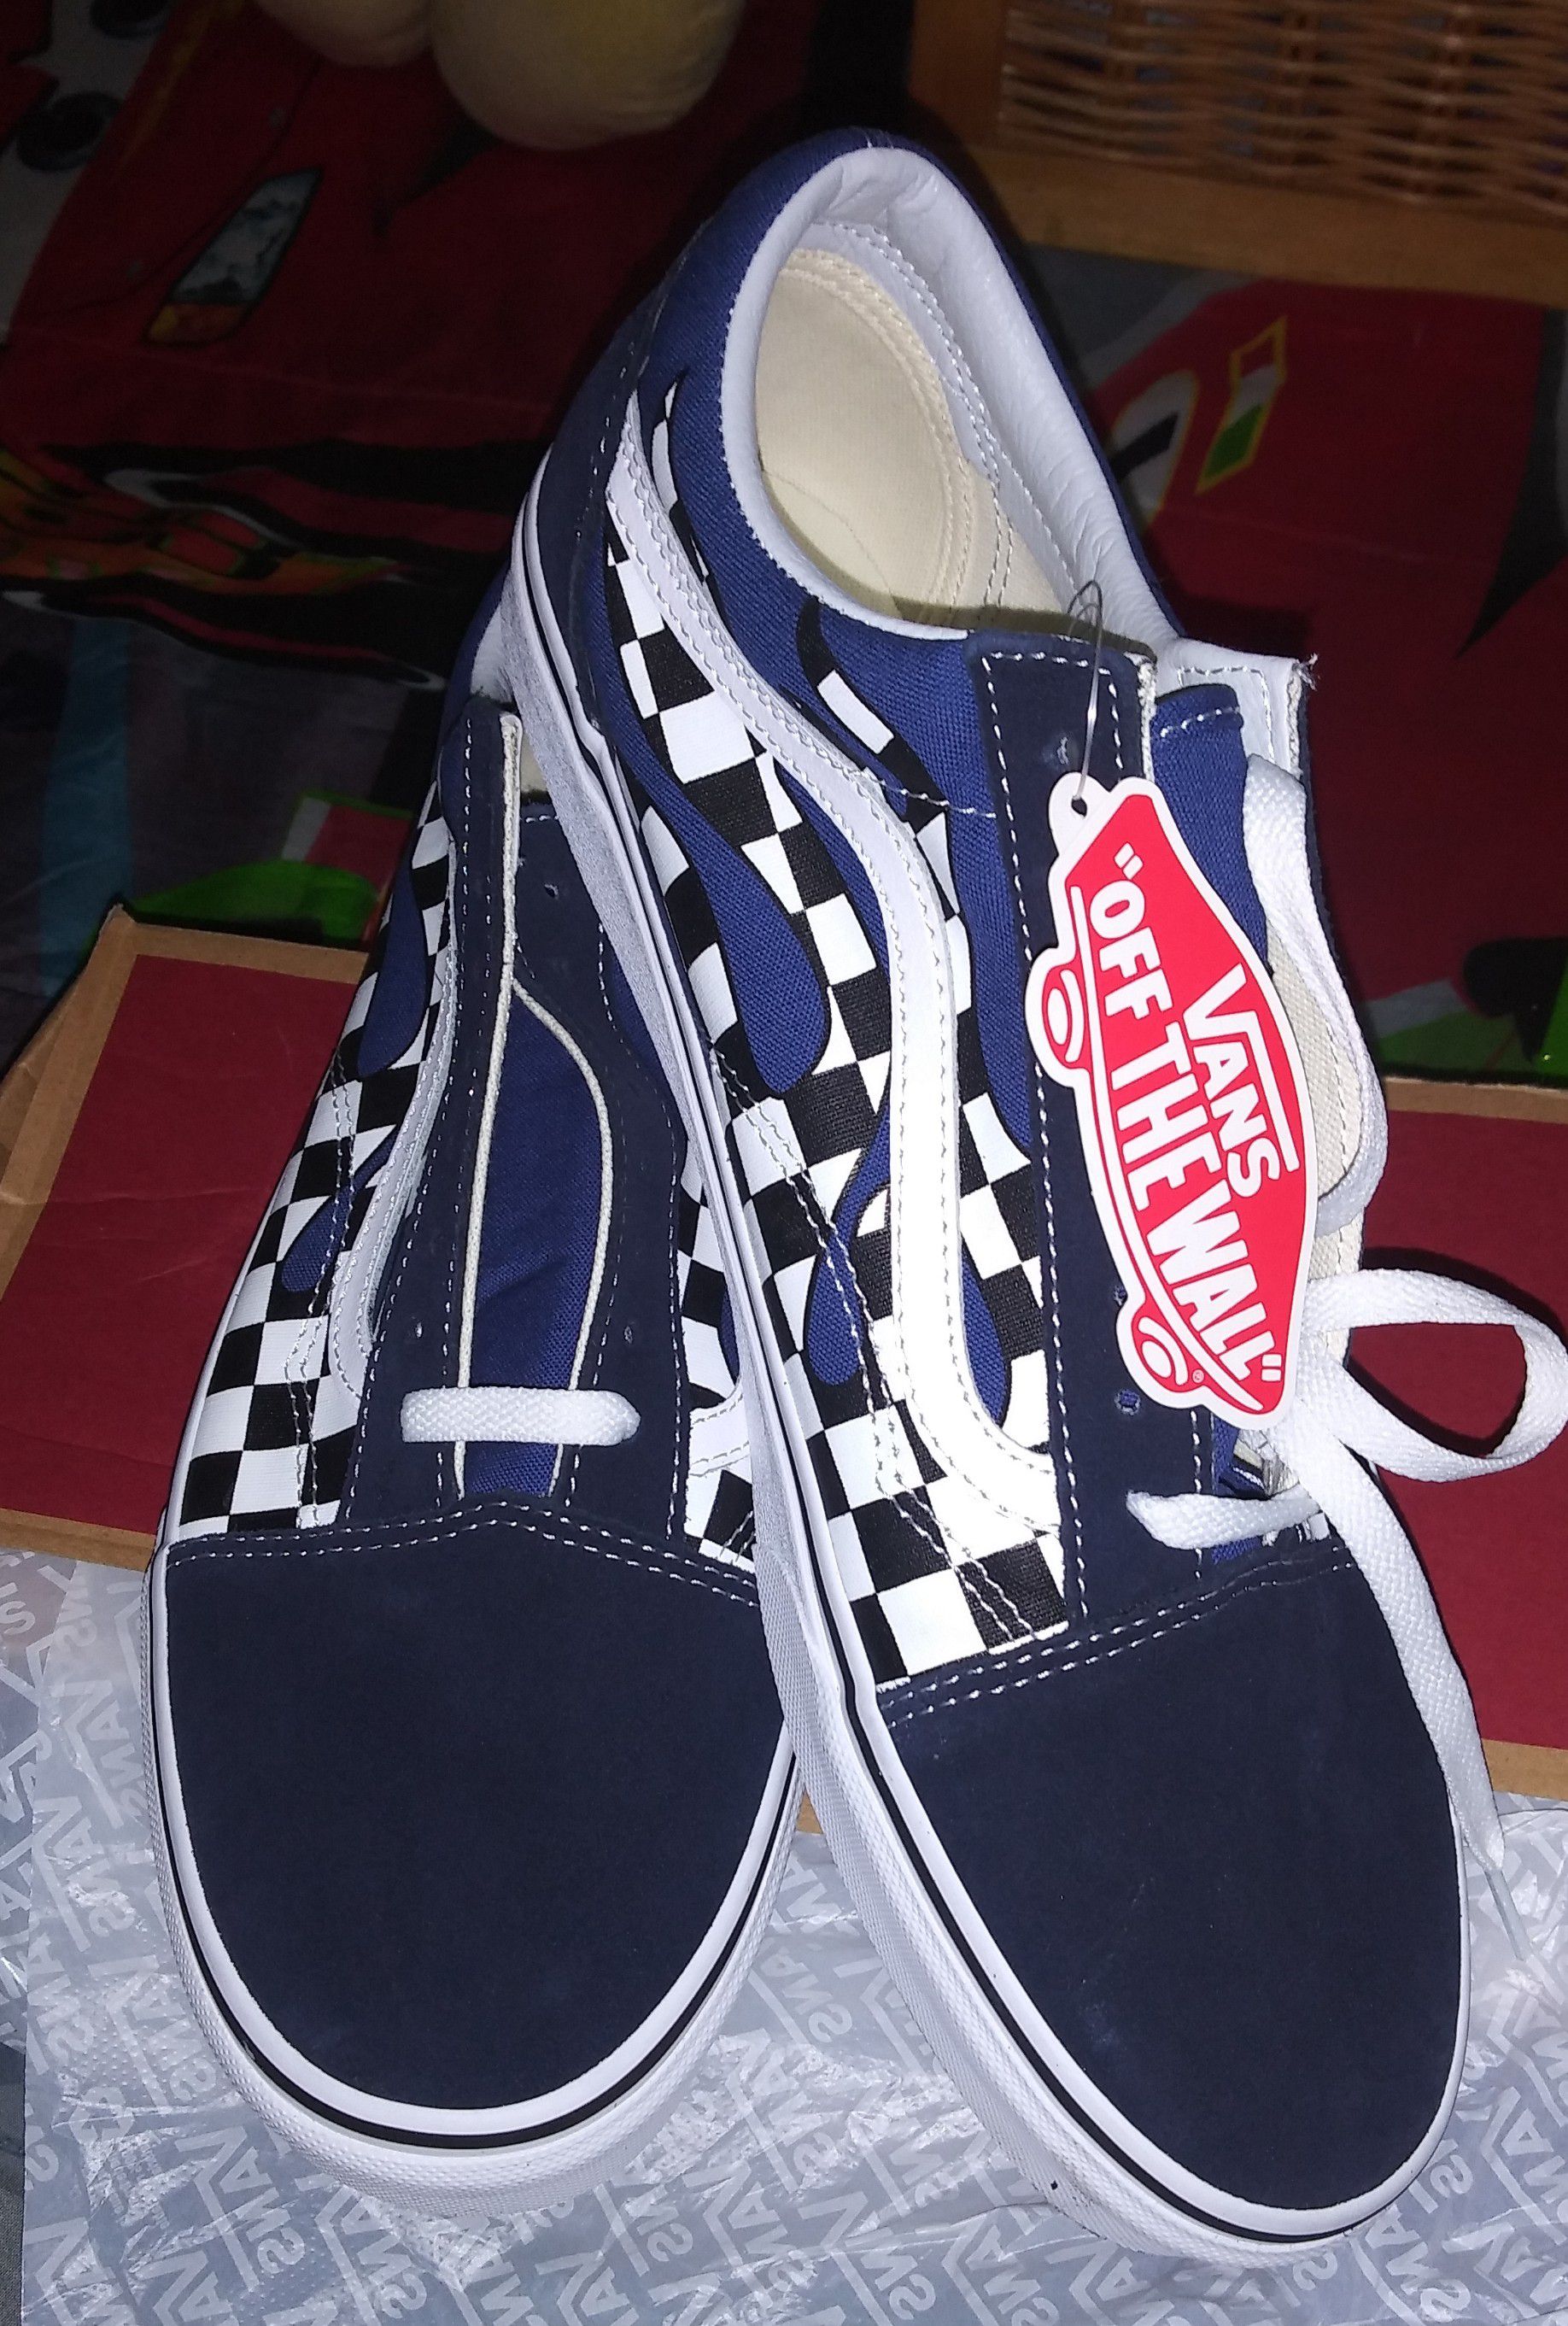 CHOES ( VANS ) NEW SIZE(12)💯